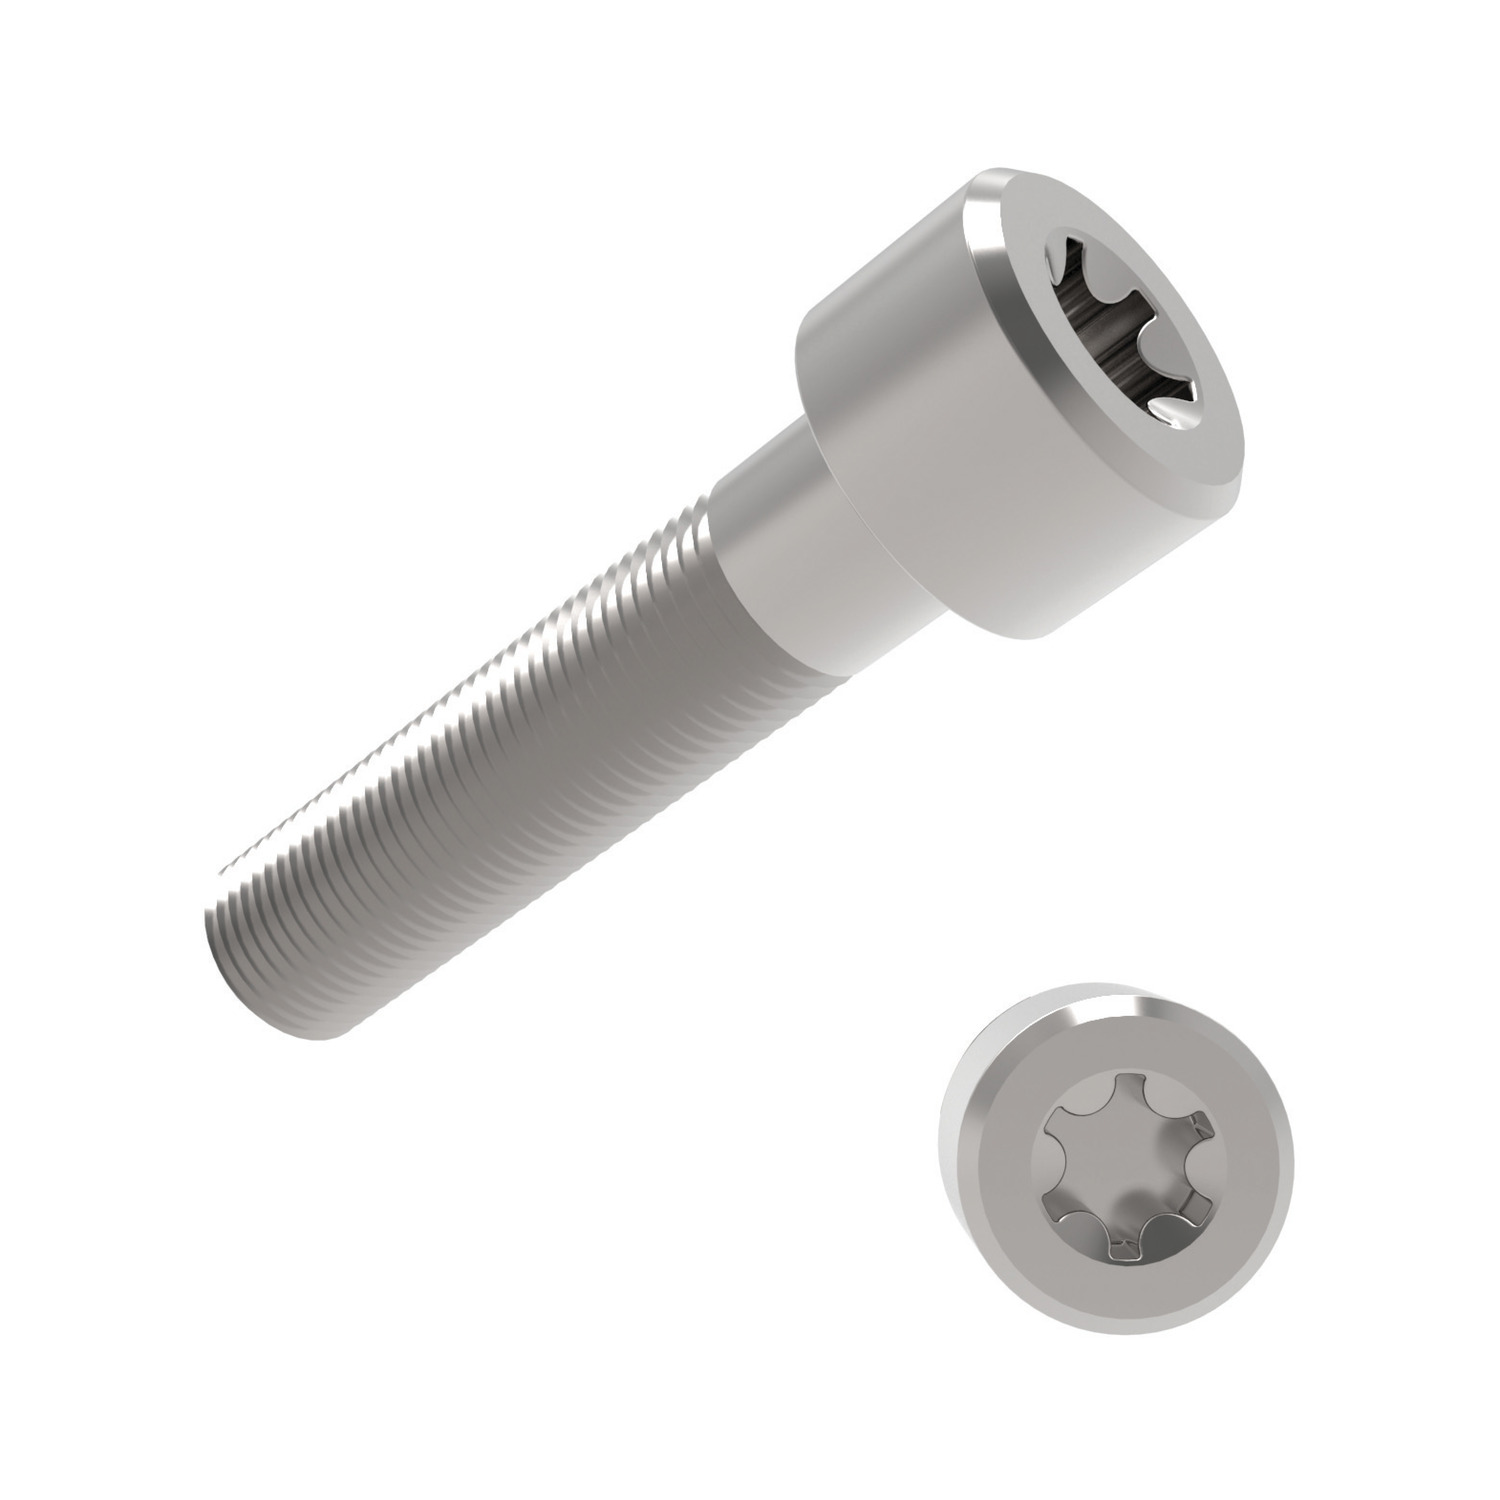 TX Cap Screws- hexalobular drive Stainless Steel A2. For the majority of screw lengths the threads goes all the way to the head of the screw (i.e. l1= l2) less 2.5 thread pitches.For longer length screws the threaded portion l21. Also available in Stainless Steel A4 (P0202.A4).